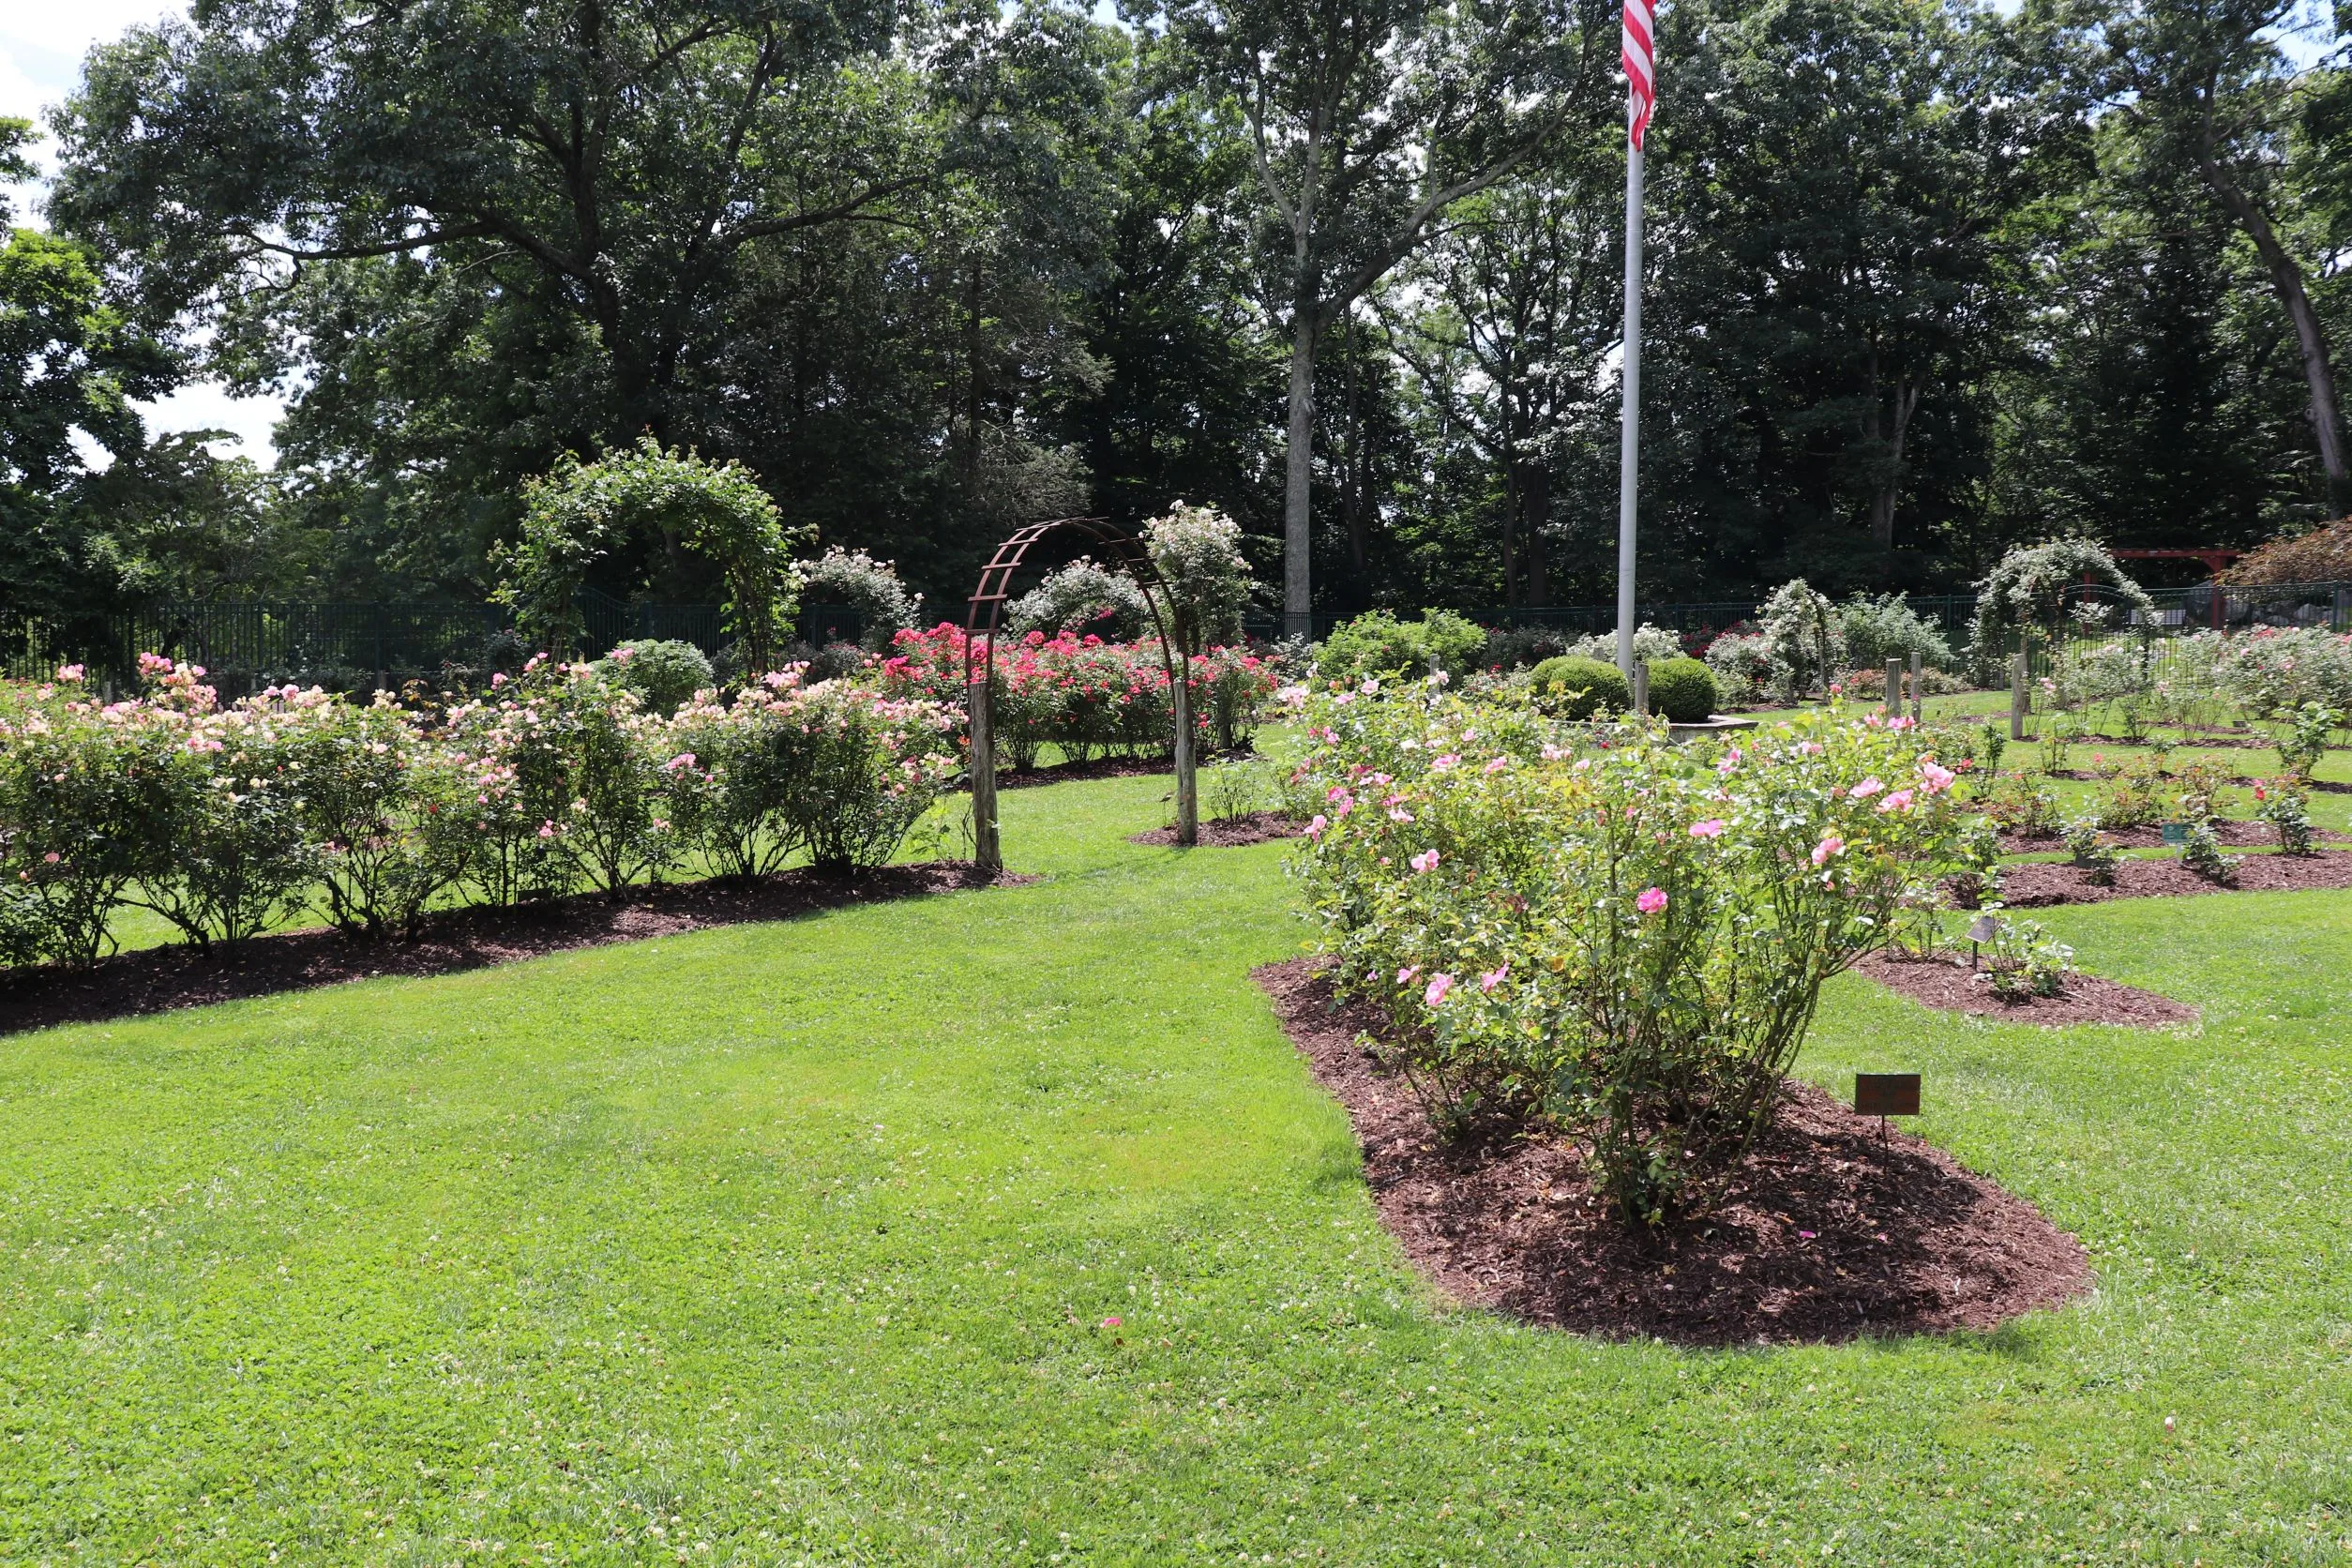 image of rose bushes in the norwich rose garden.